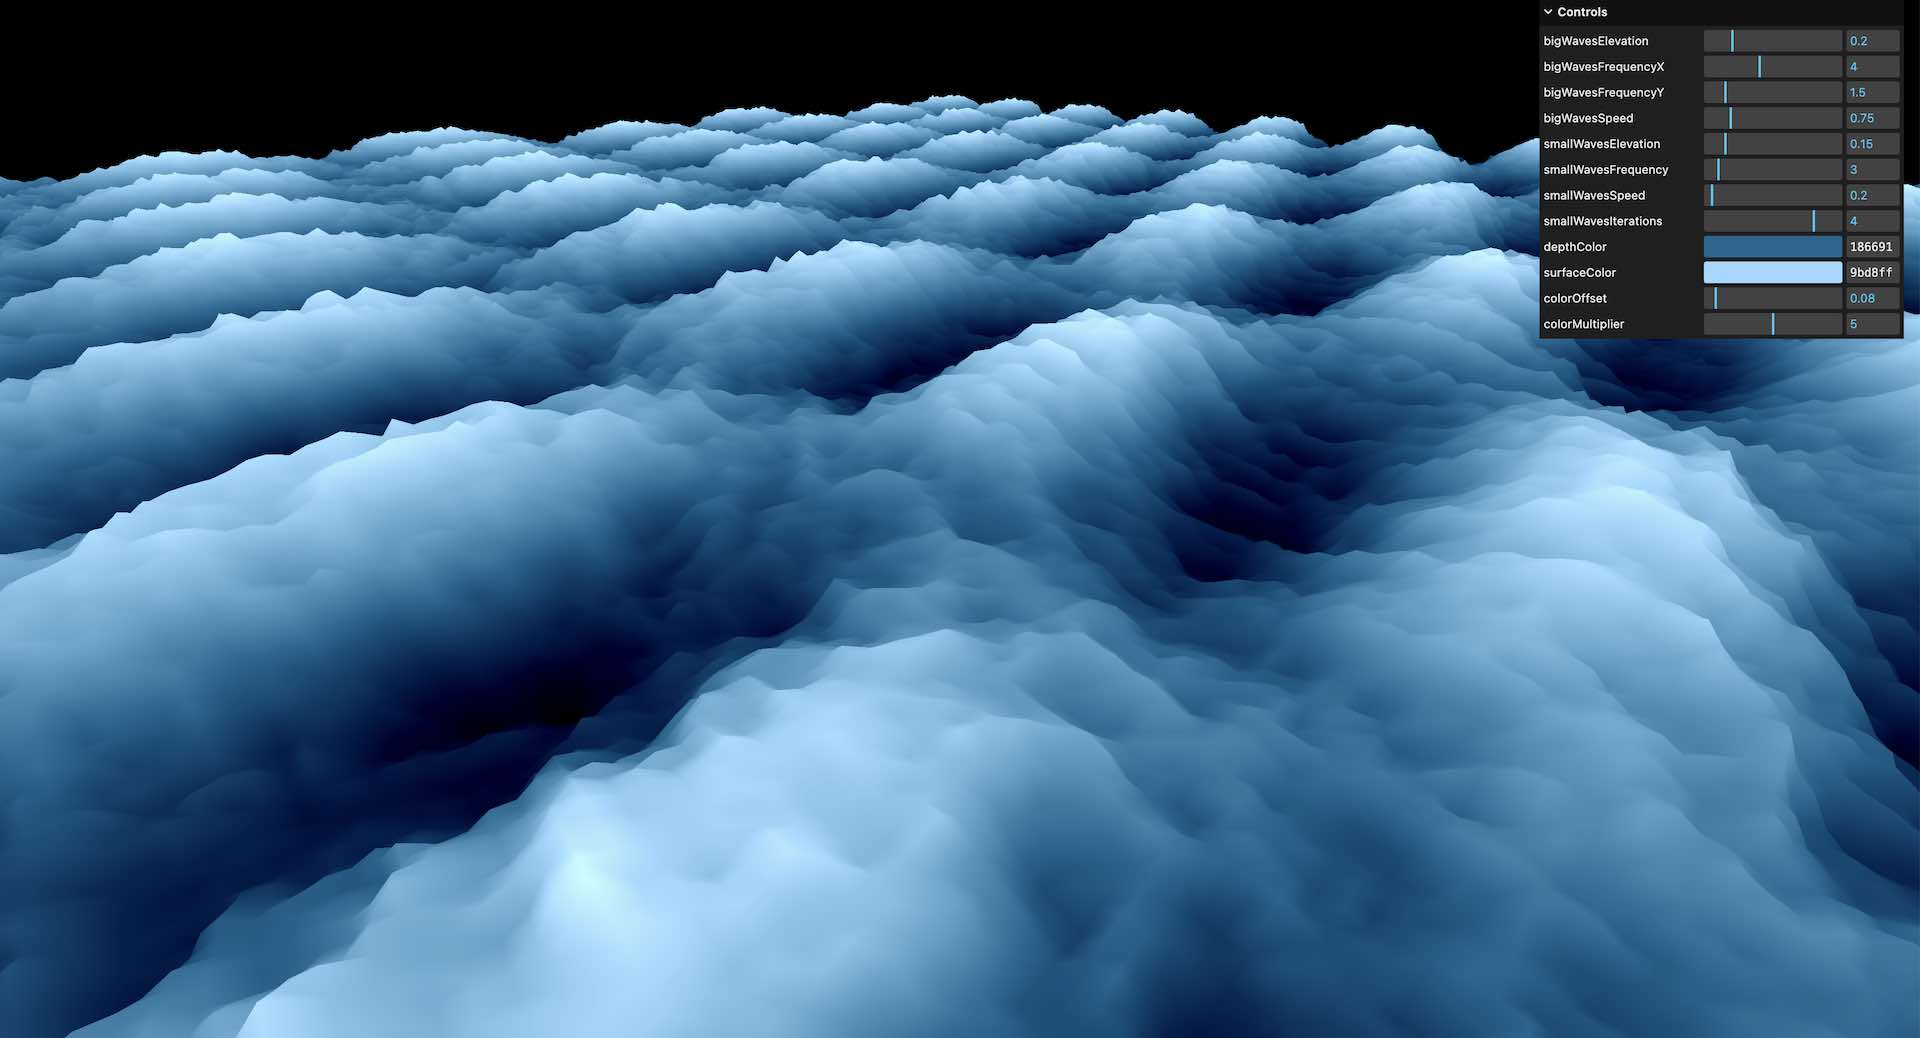 A 3D image that simulates a raging sea at night with varying shades of blue, alongside a control panel with sliders for 'bigWavesElevation', 'bigWavesFrequency', and other parameters, indicating this is a computer-generated visualization with adjustable settings for wave dynamics.